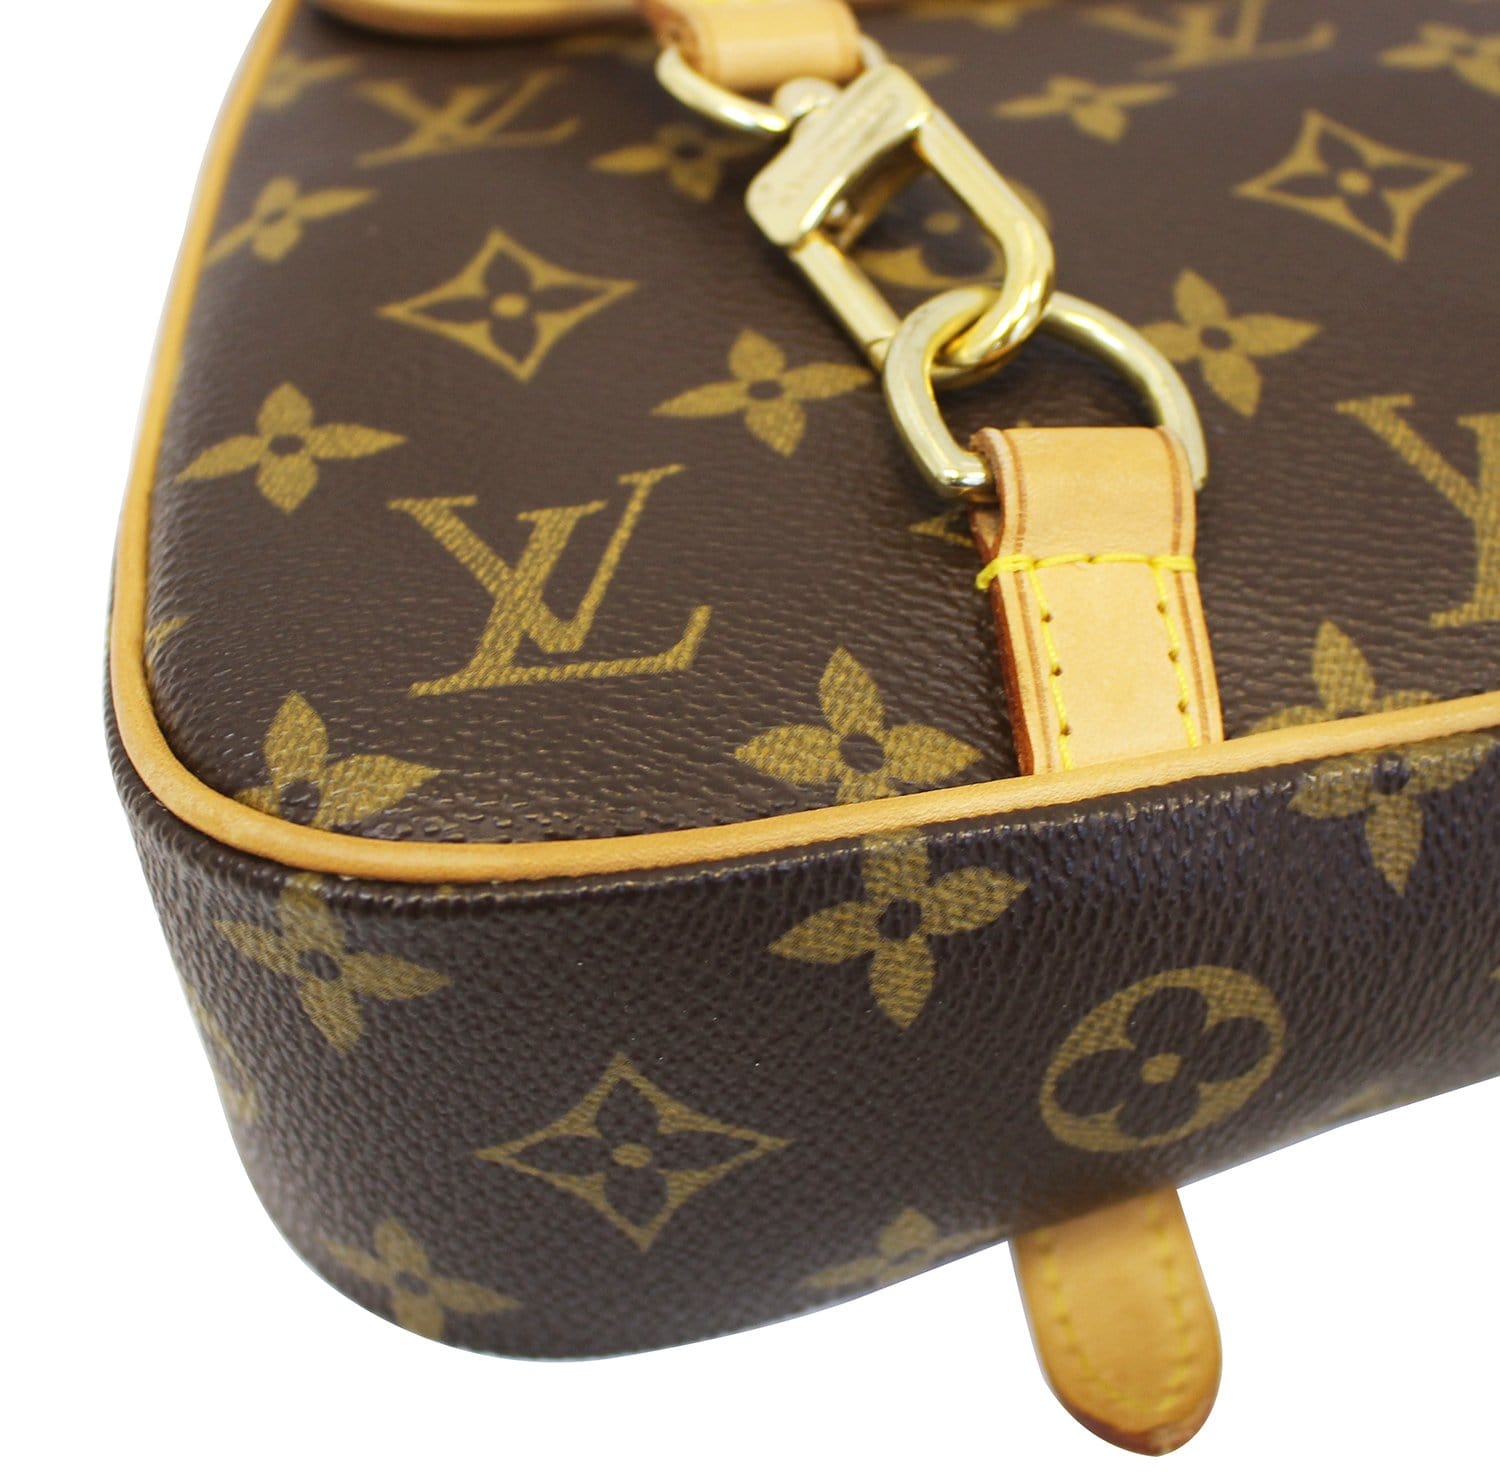 Thoughts on the Marelle bag? : r/Louisvuitton